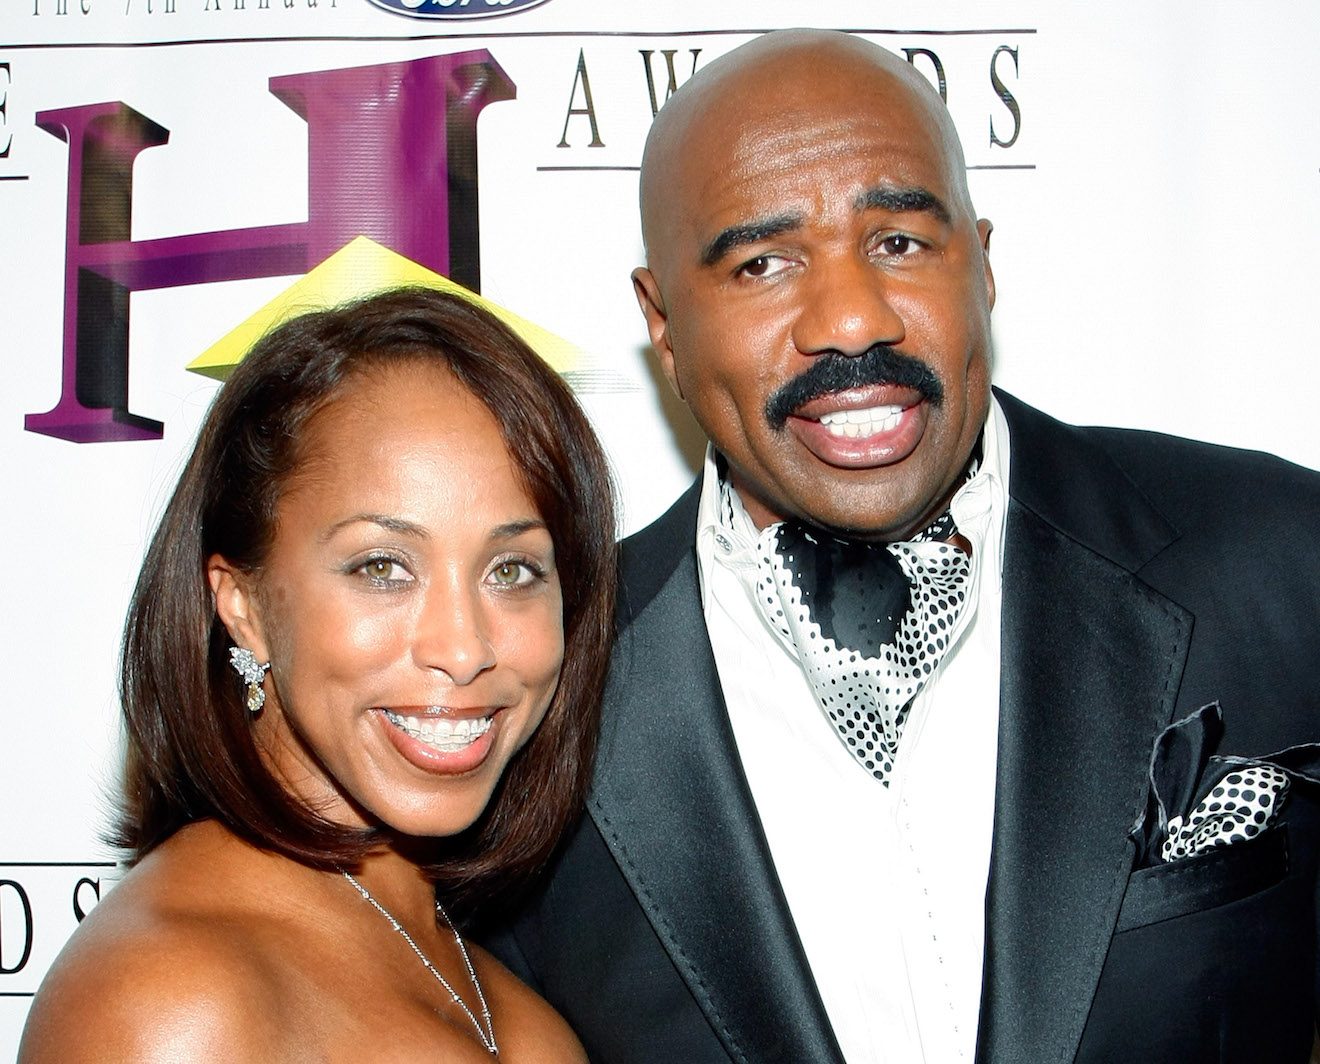 Steve Harvey and his wife Marjorie Bridges at the 7th Annual Hoodie Awards.